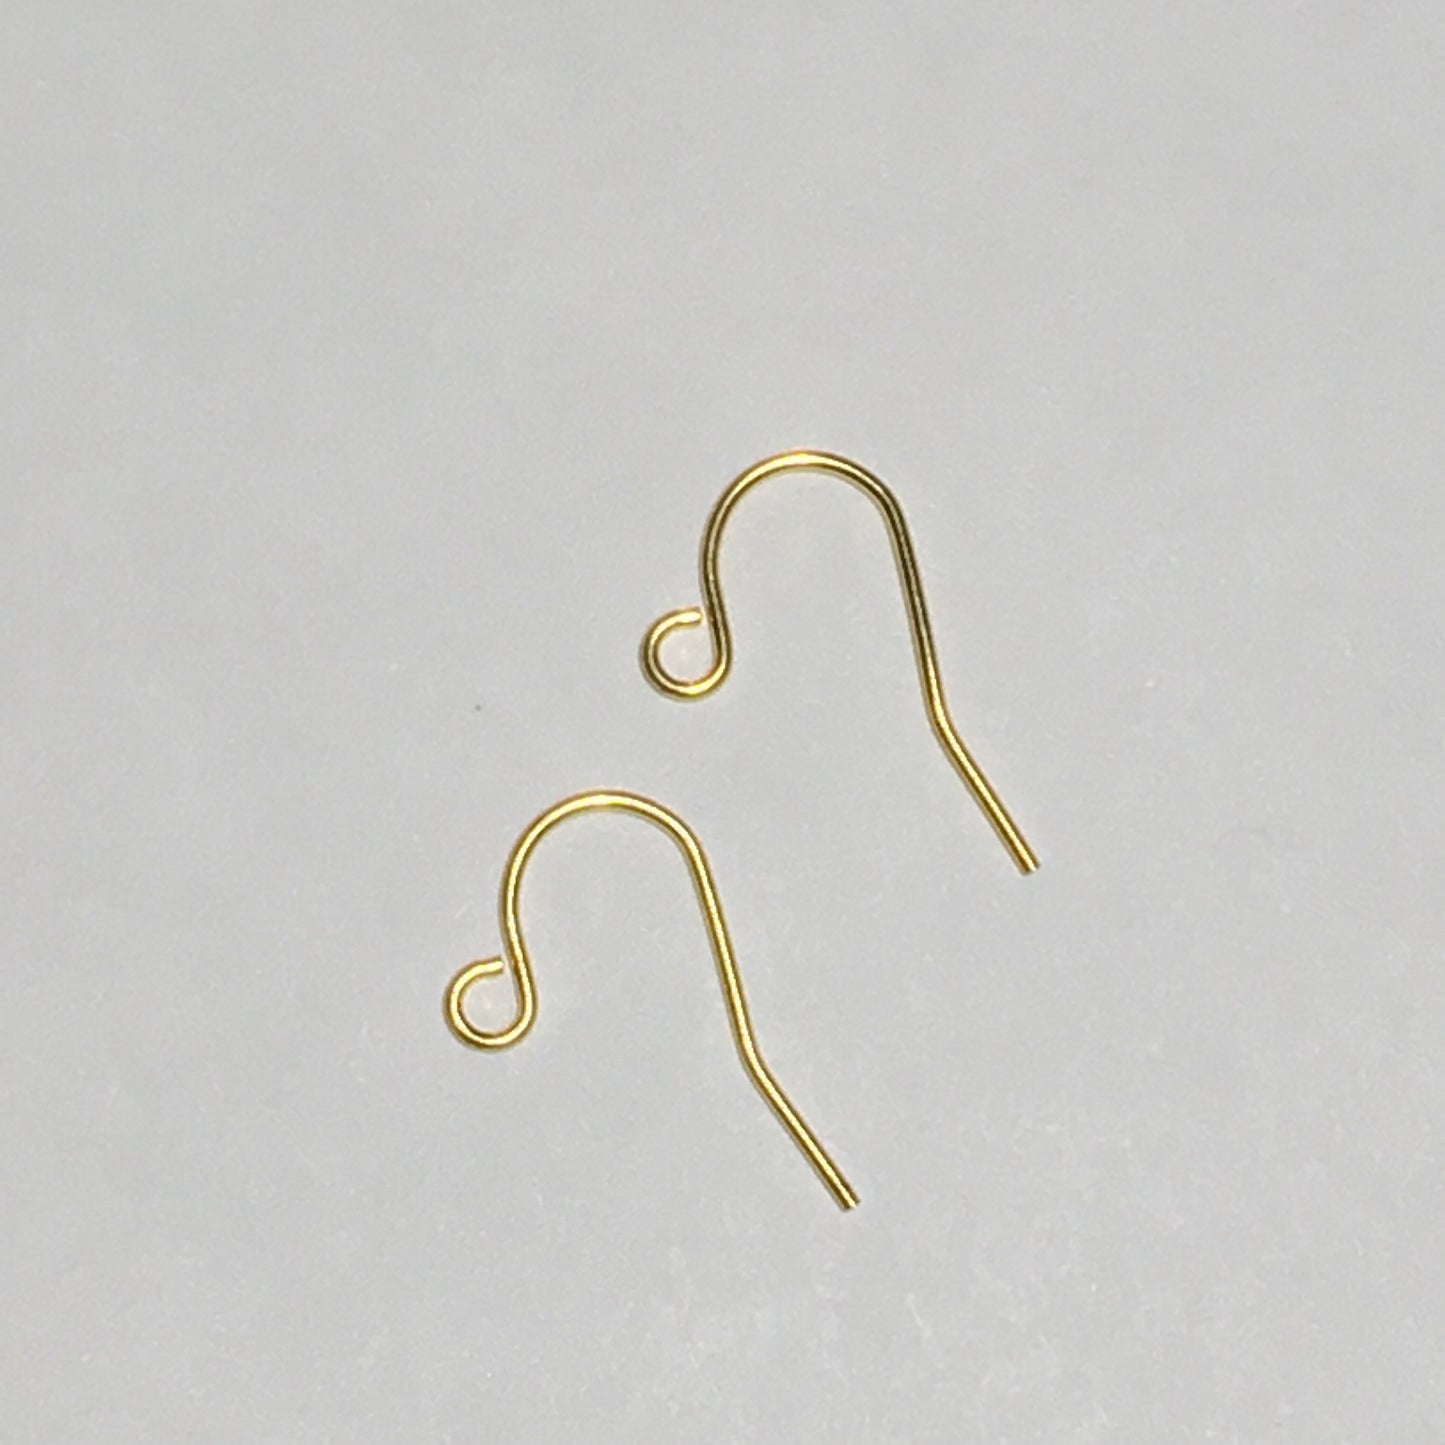 21-Gauge 11 mm Gold French Fish Hook Ear Wires - 1 Pair